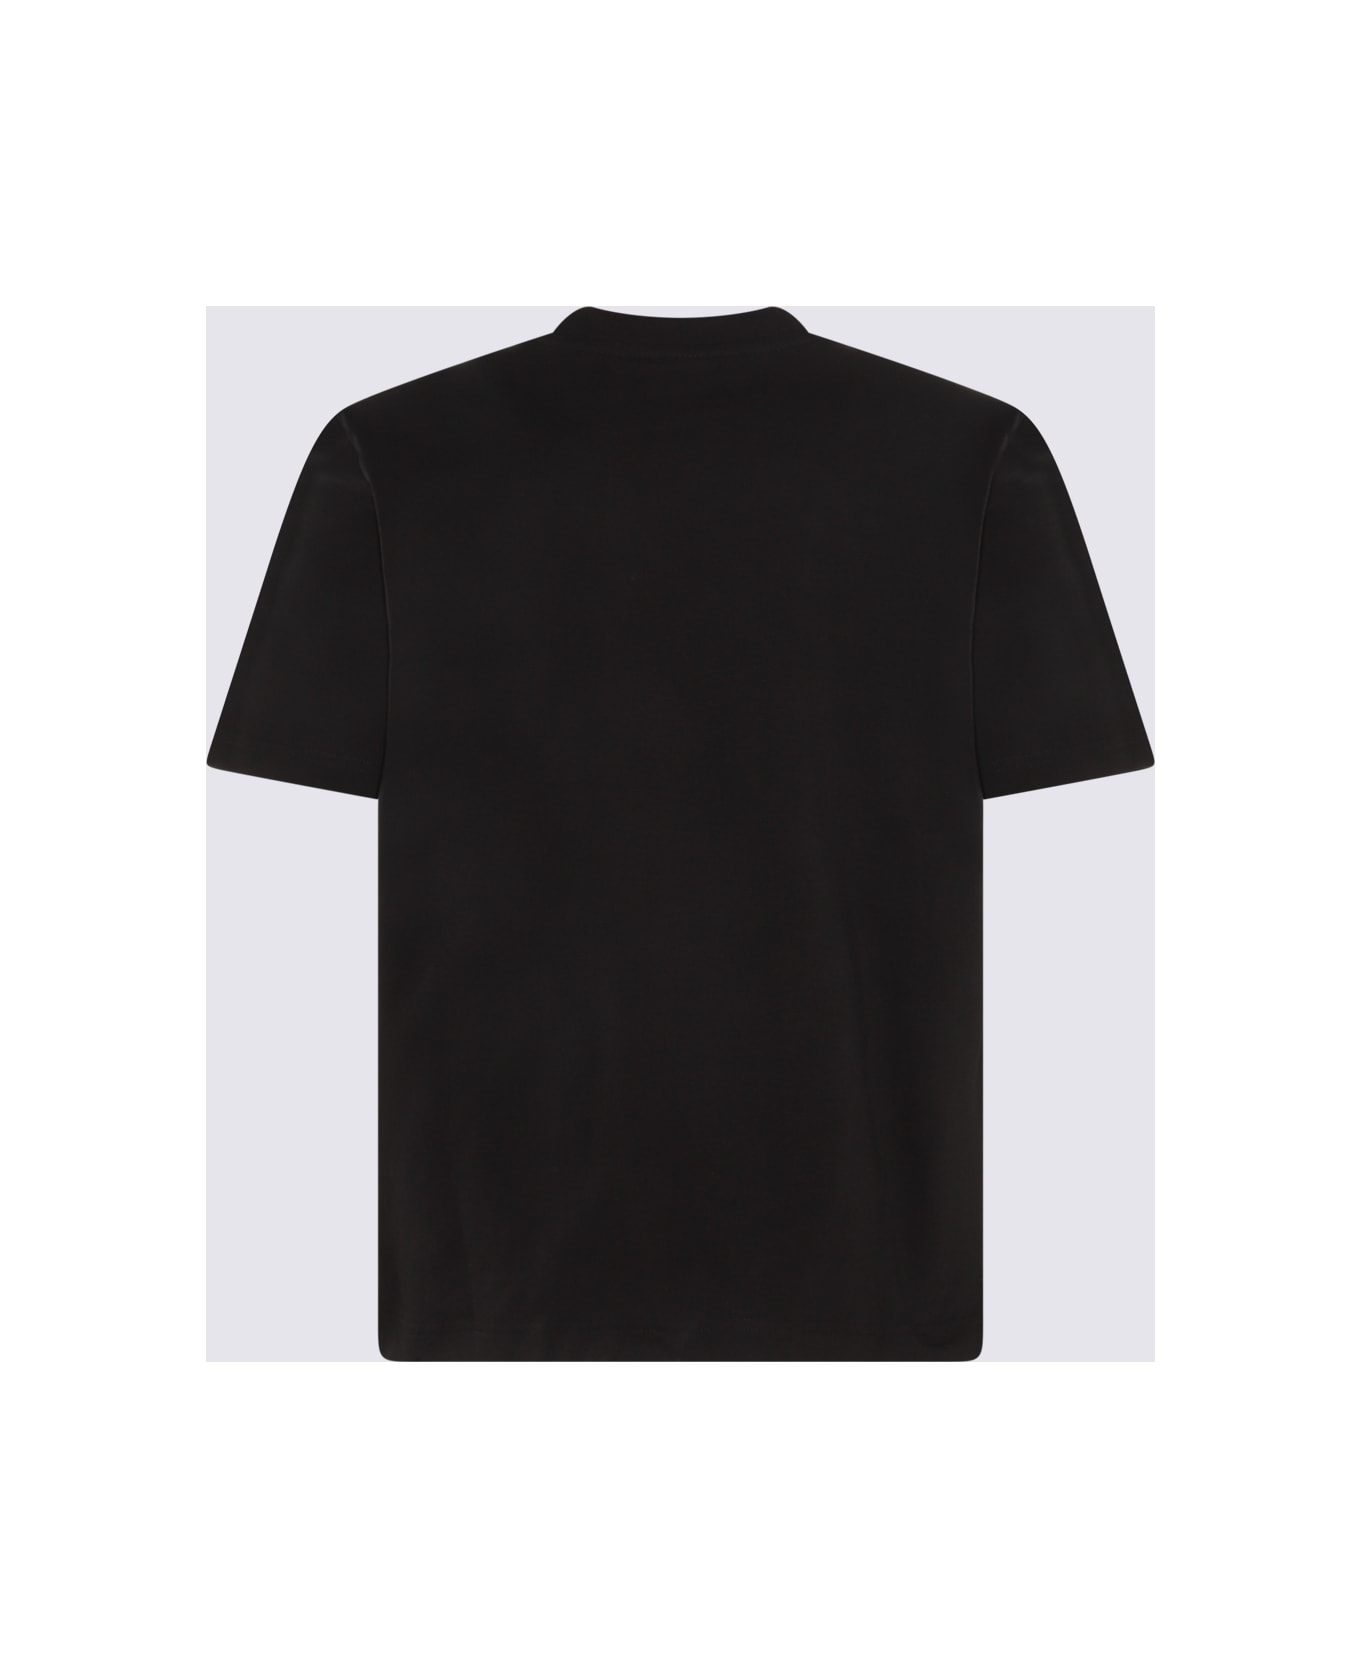 Paul Smith Black And Green Cotton T-shirt - Black シャツ